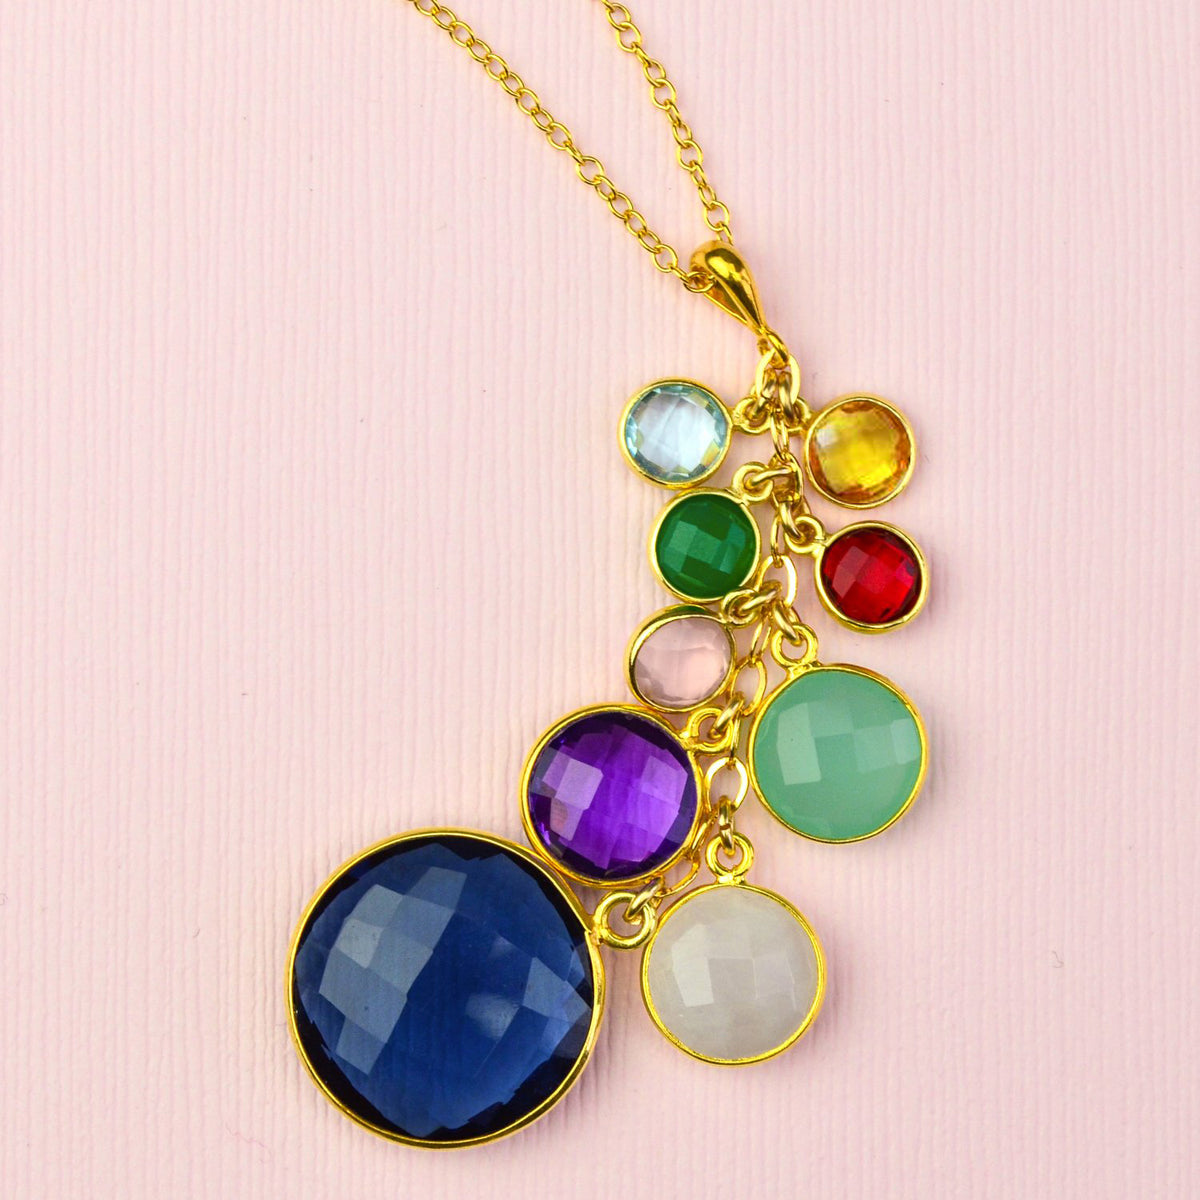 GRANDMOTHERS BIRTHSTONE NECKLACE – Generations of Love